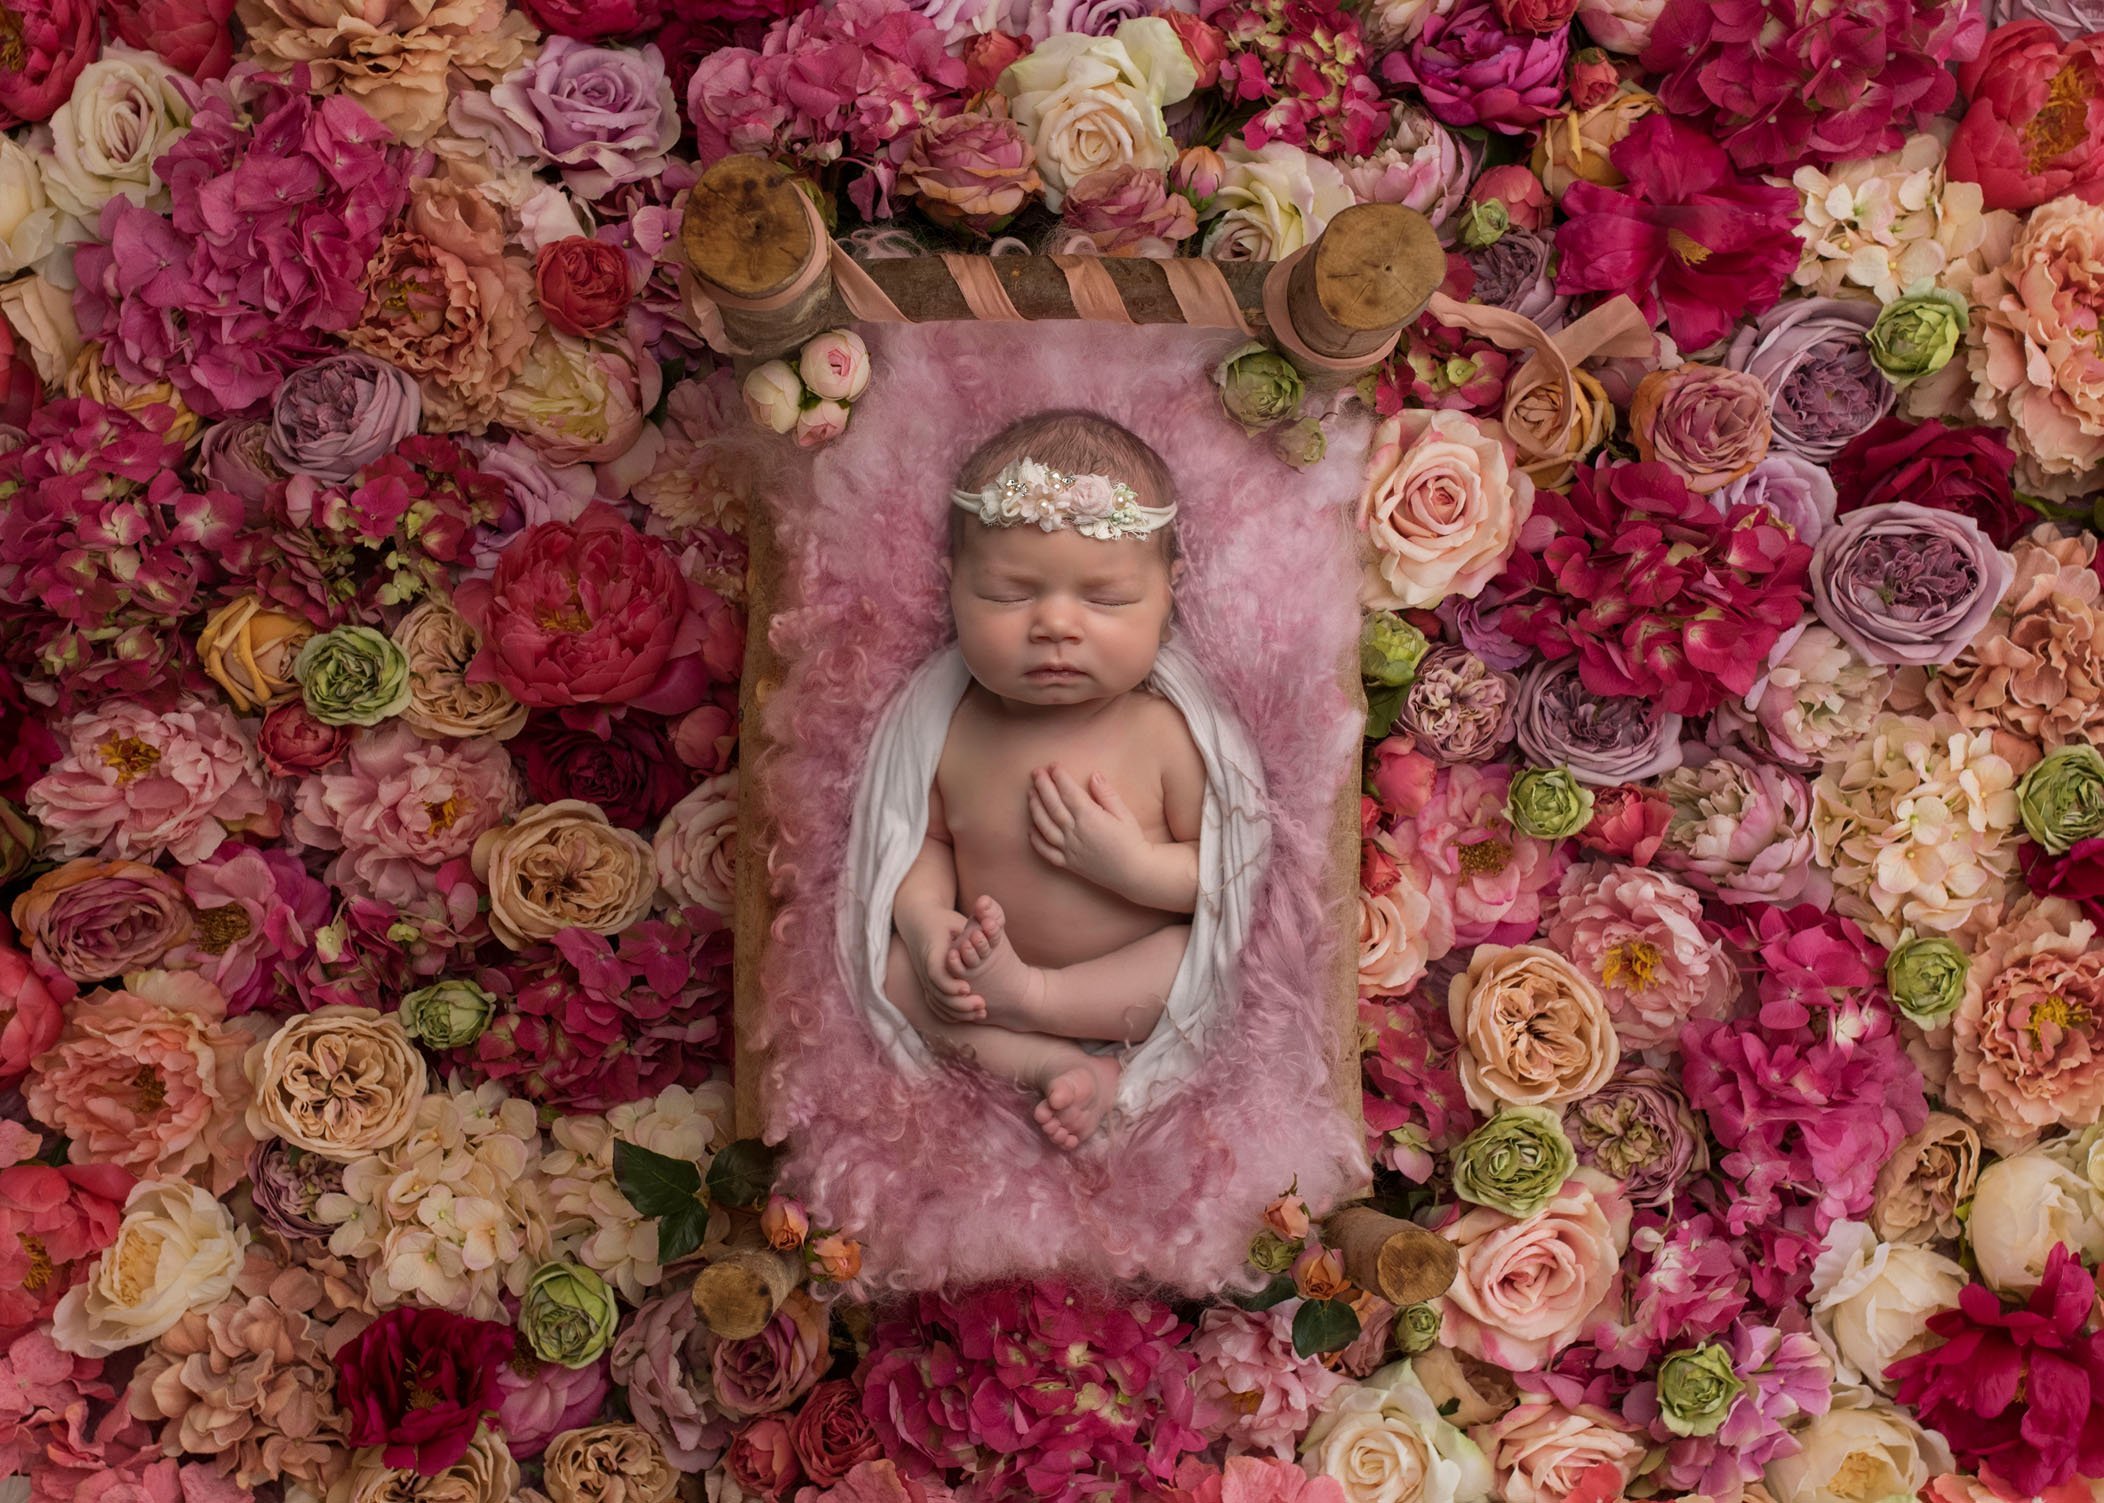 newborn baby girl asleep on bed in the middle of tons of pastel colored roses